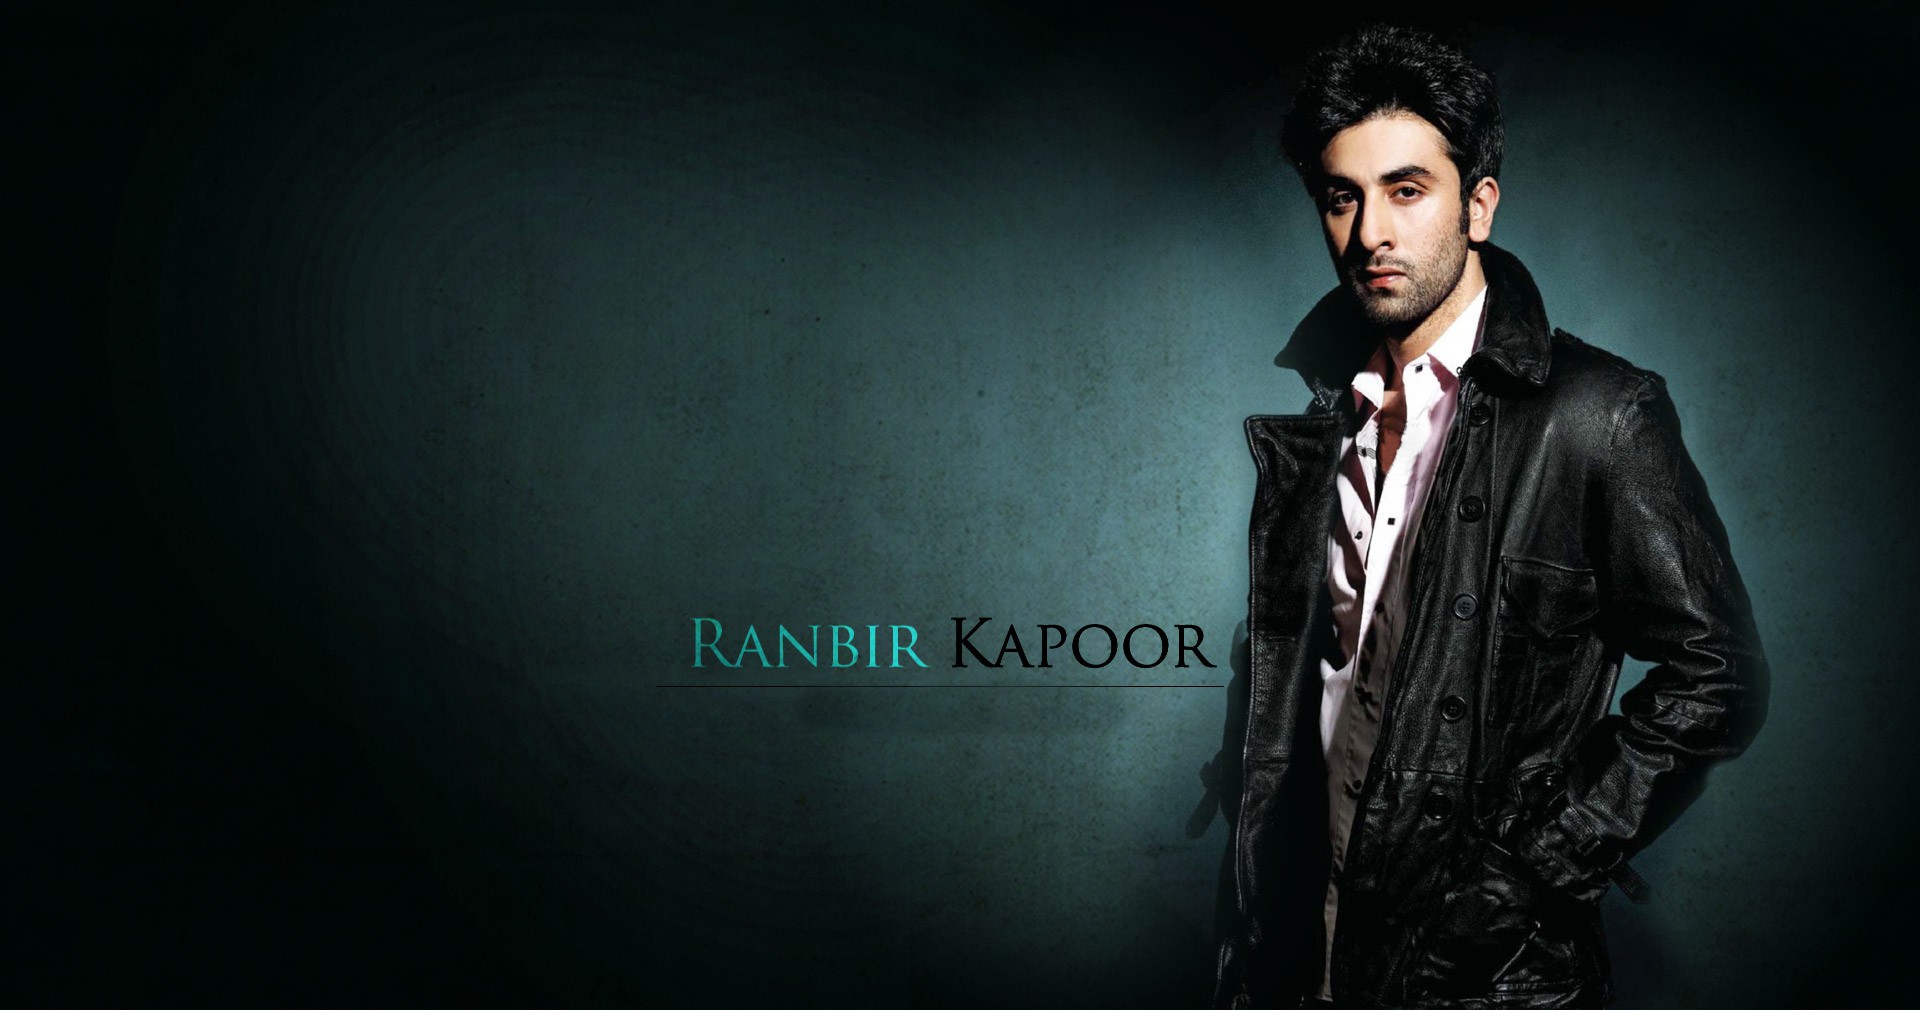 ranbir kapoor hd wallpapers,suit,cool,leather jacket,formal wear,flash photography